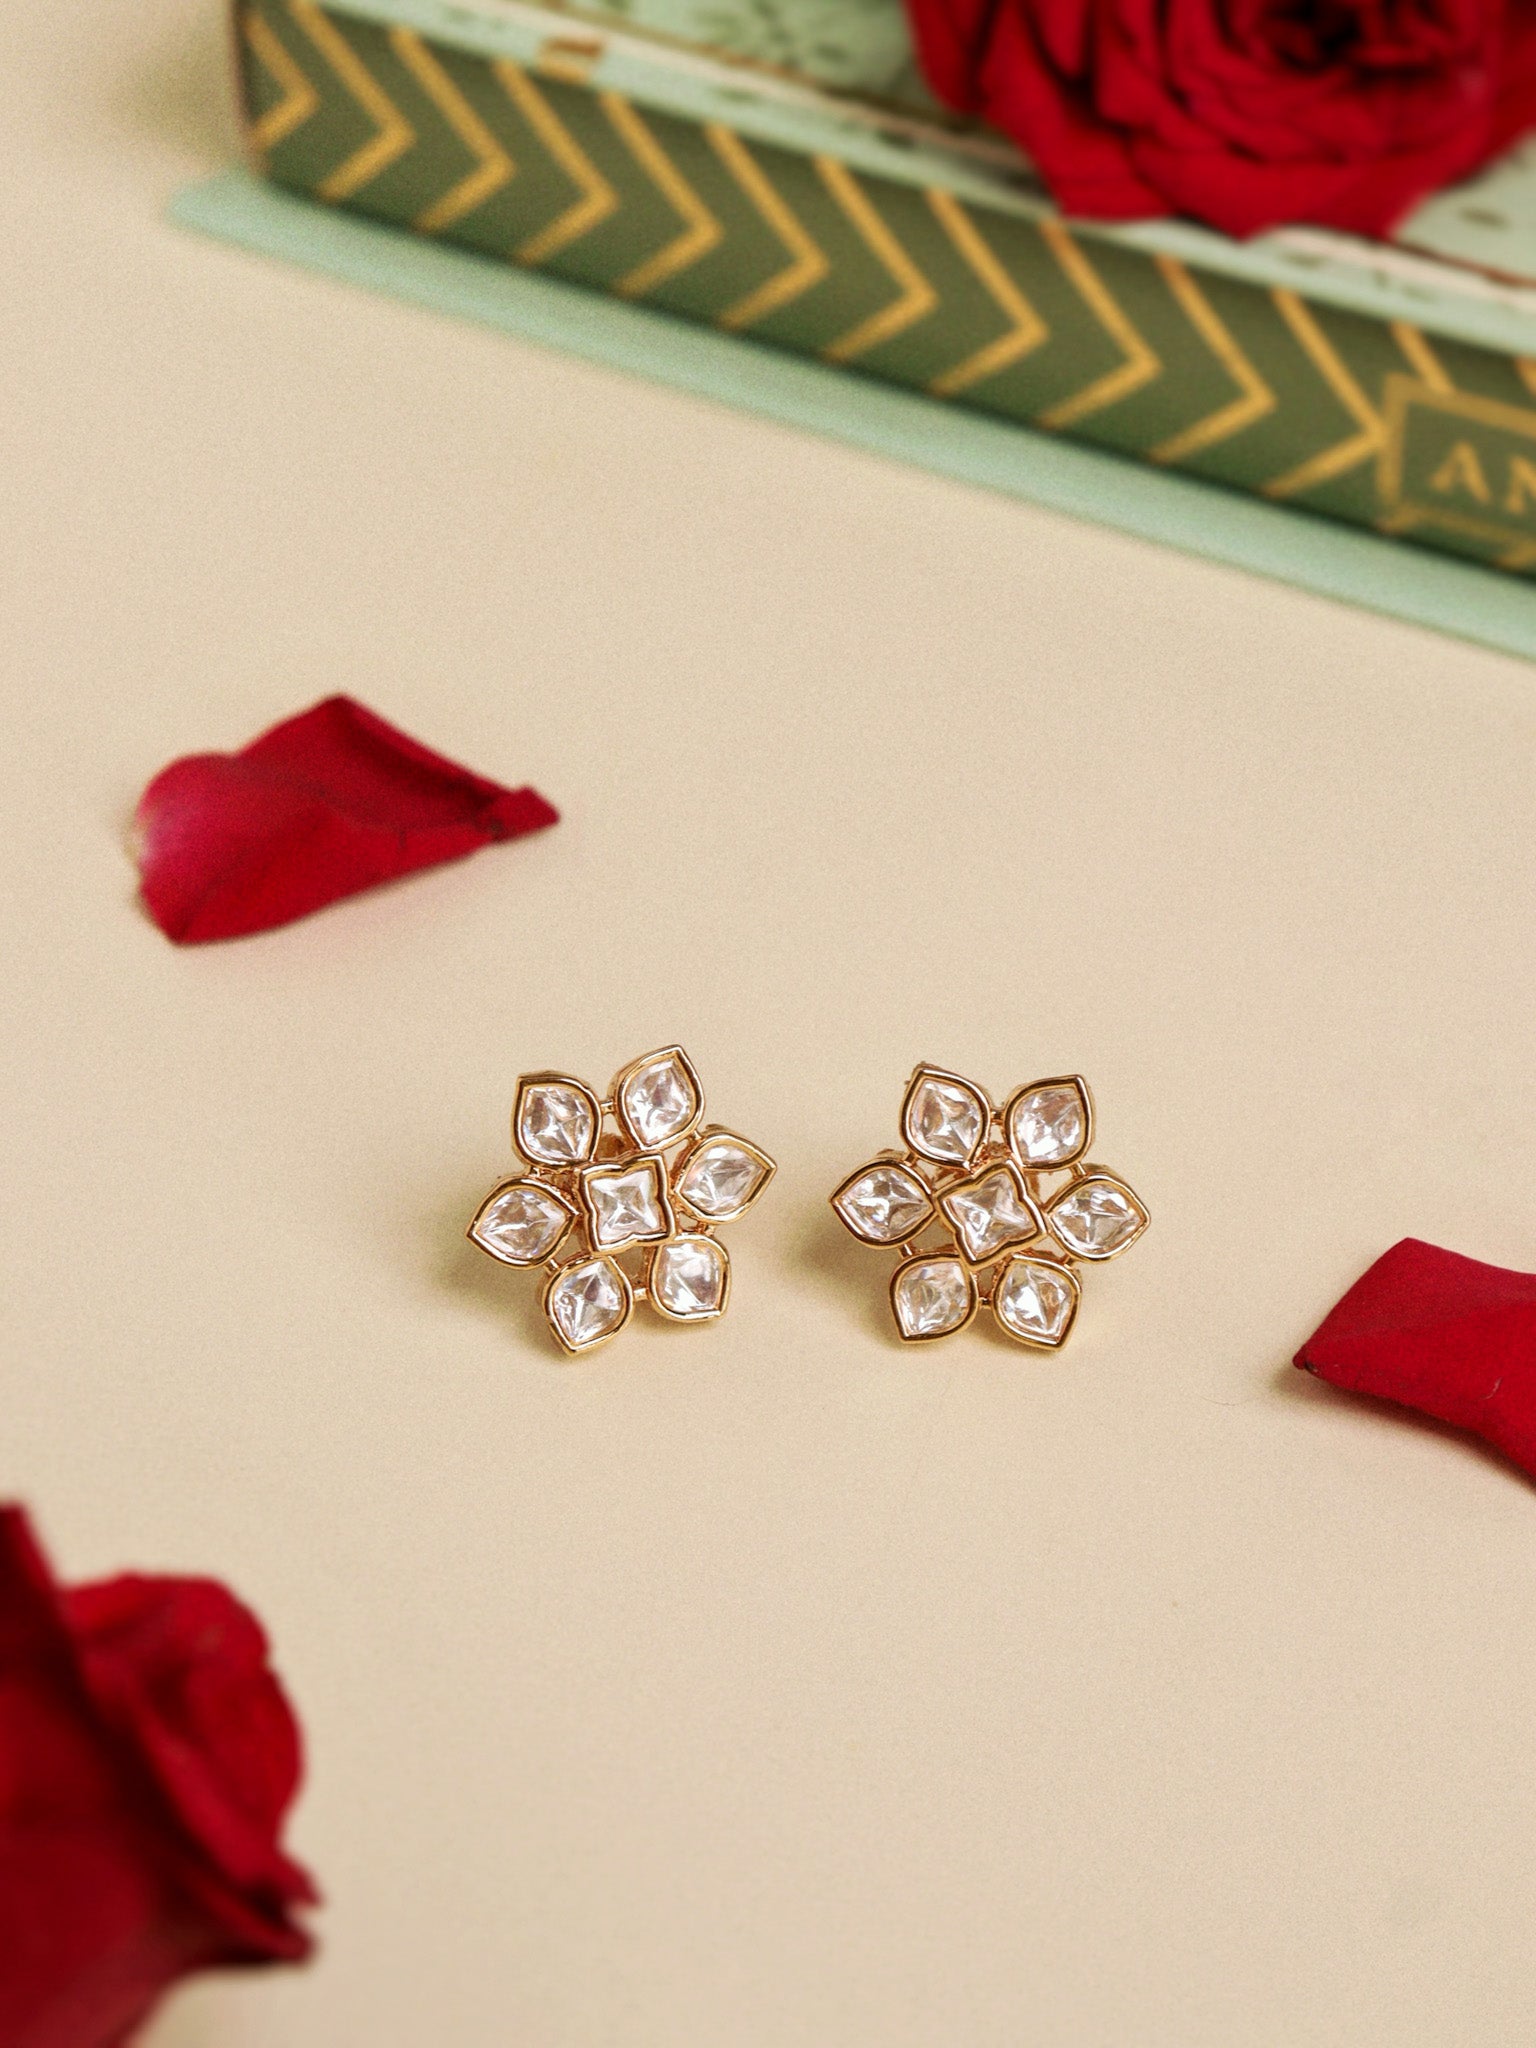  18 KT Gold Plated Floral Studs